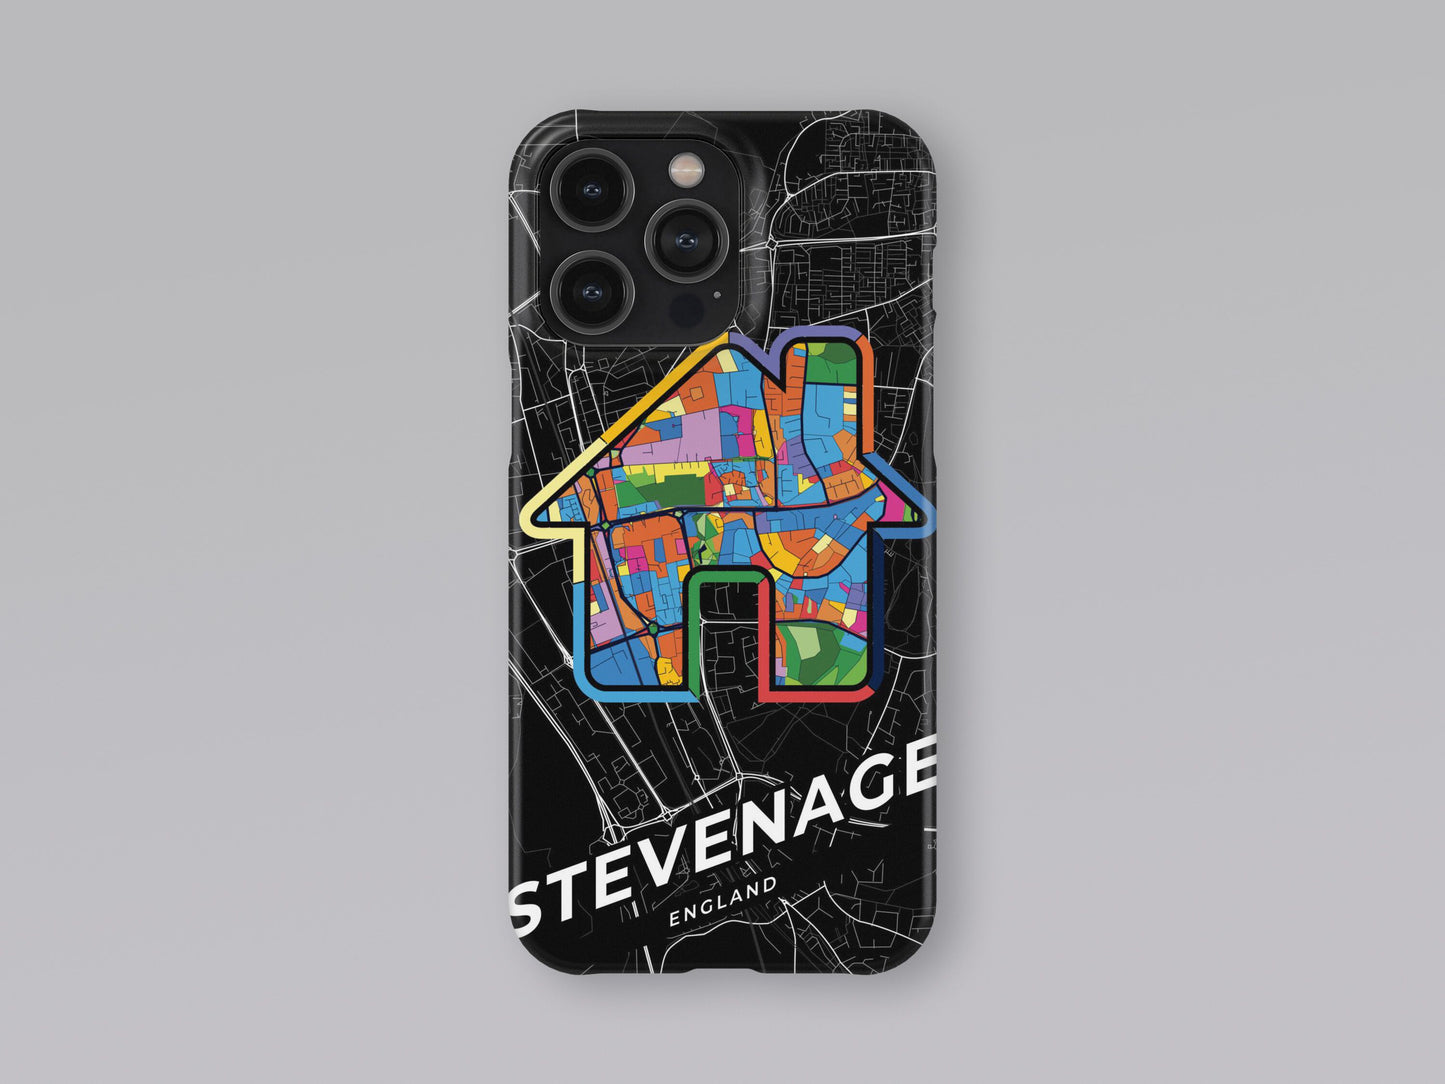 Stevenage England slim phone case with colorful icon 3